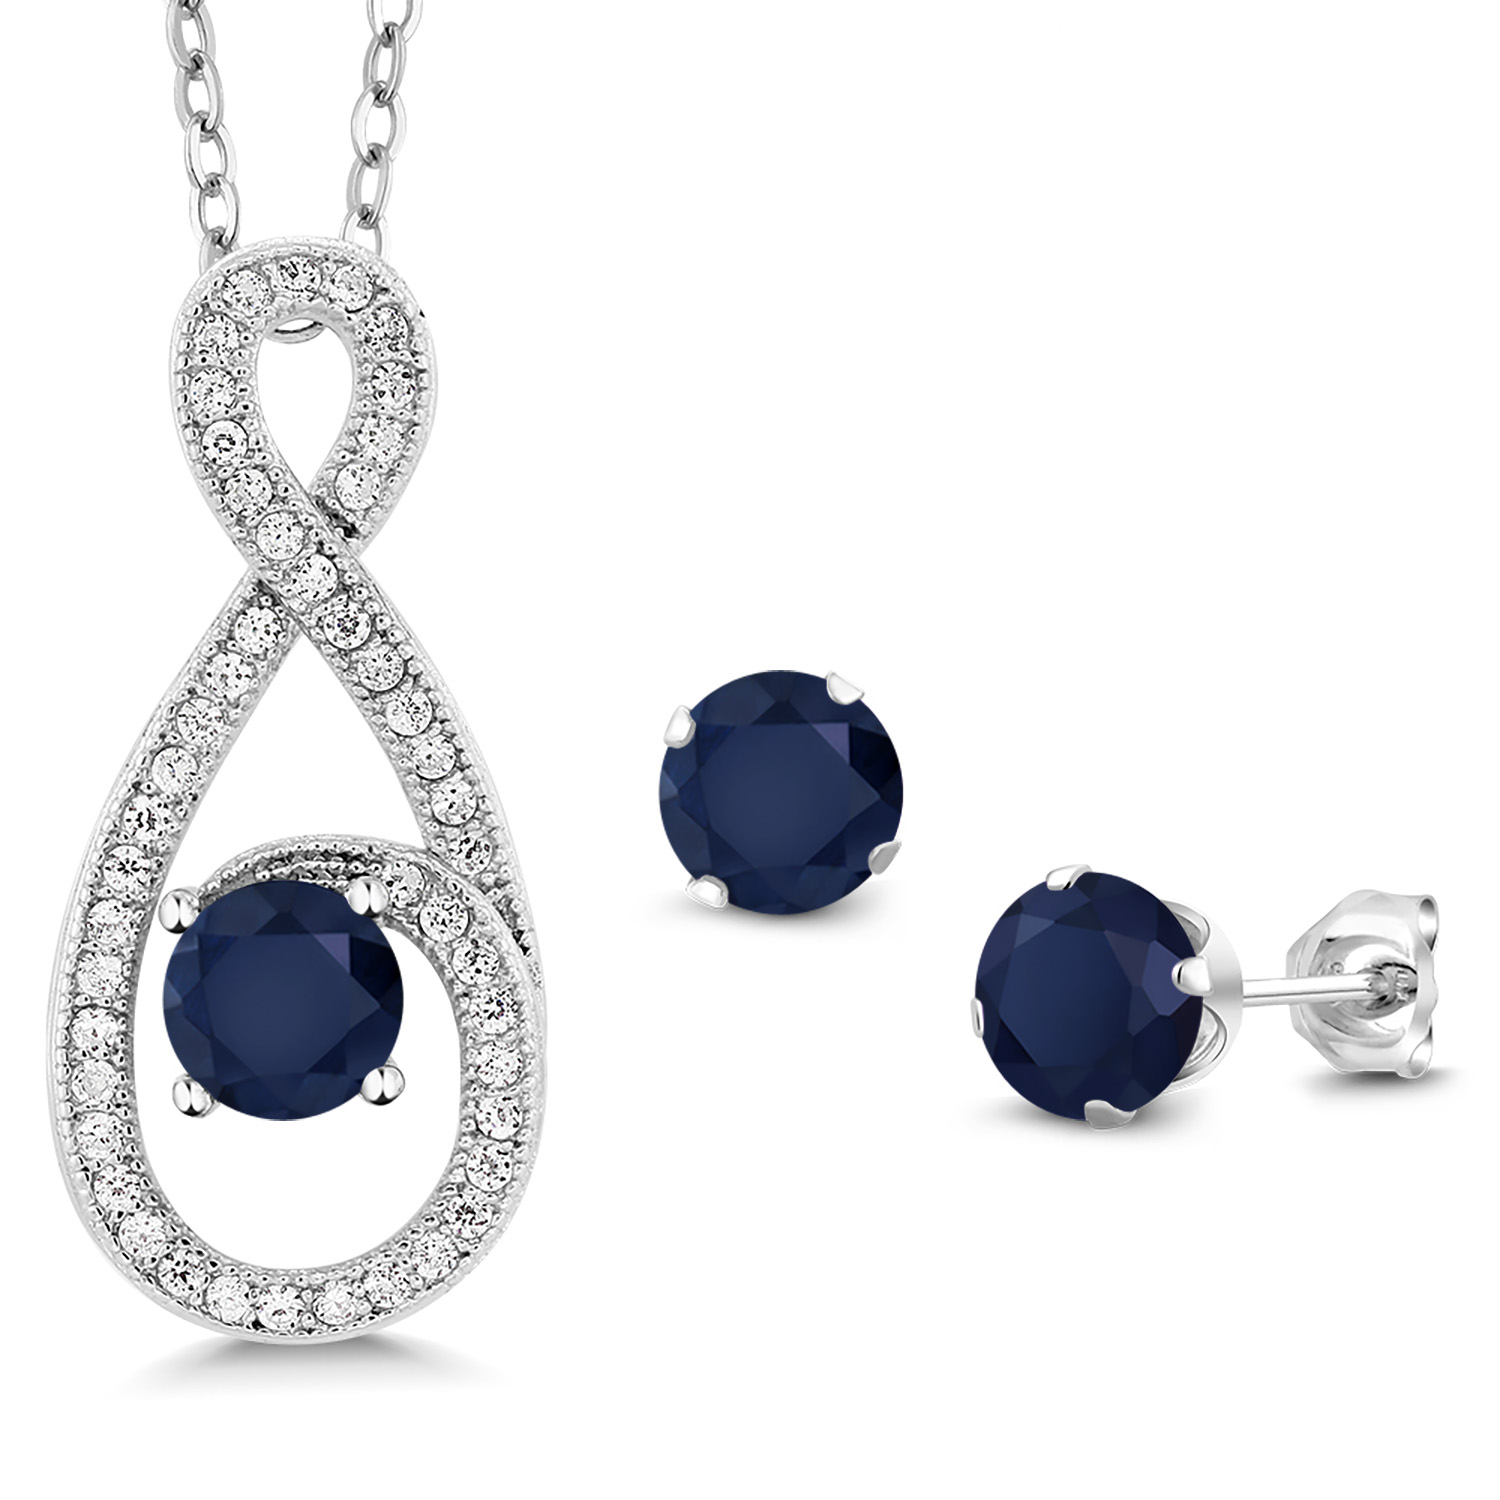 Gem Stone King 2.40 Ct Round Blue Sapphire 925 Sterling Silver Pendant and Earrings Jewelry Set